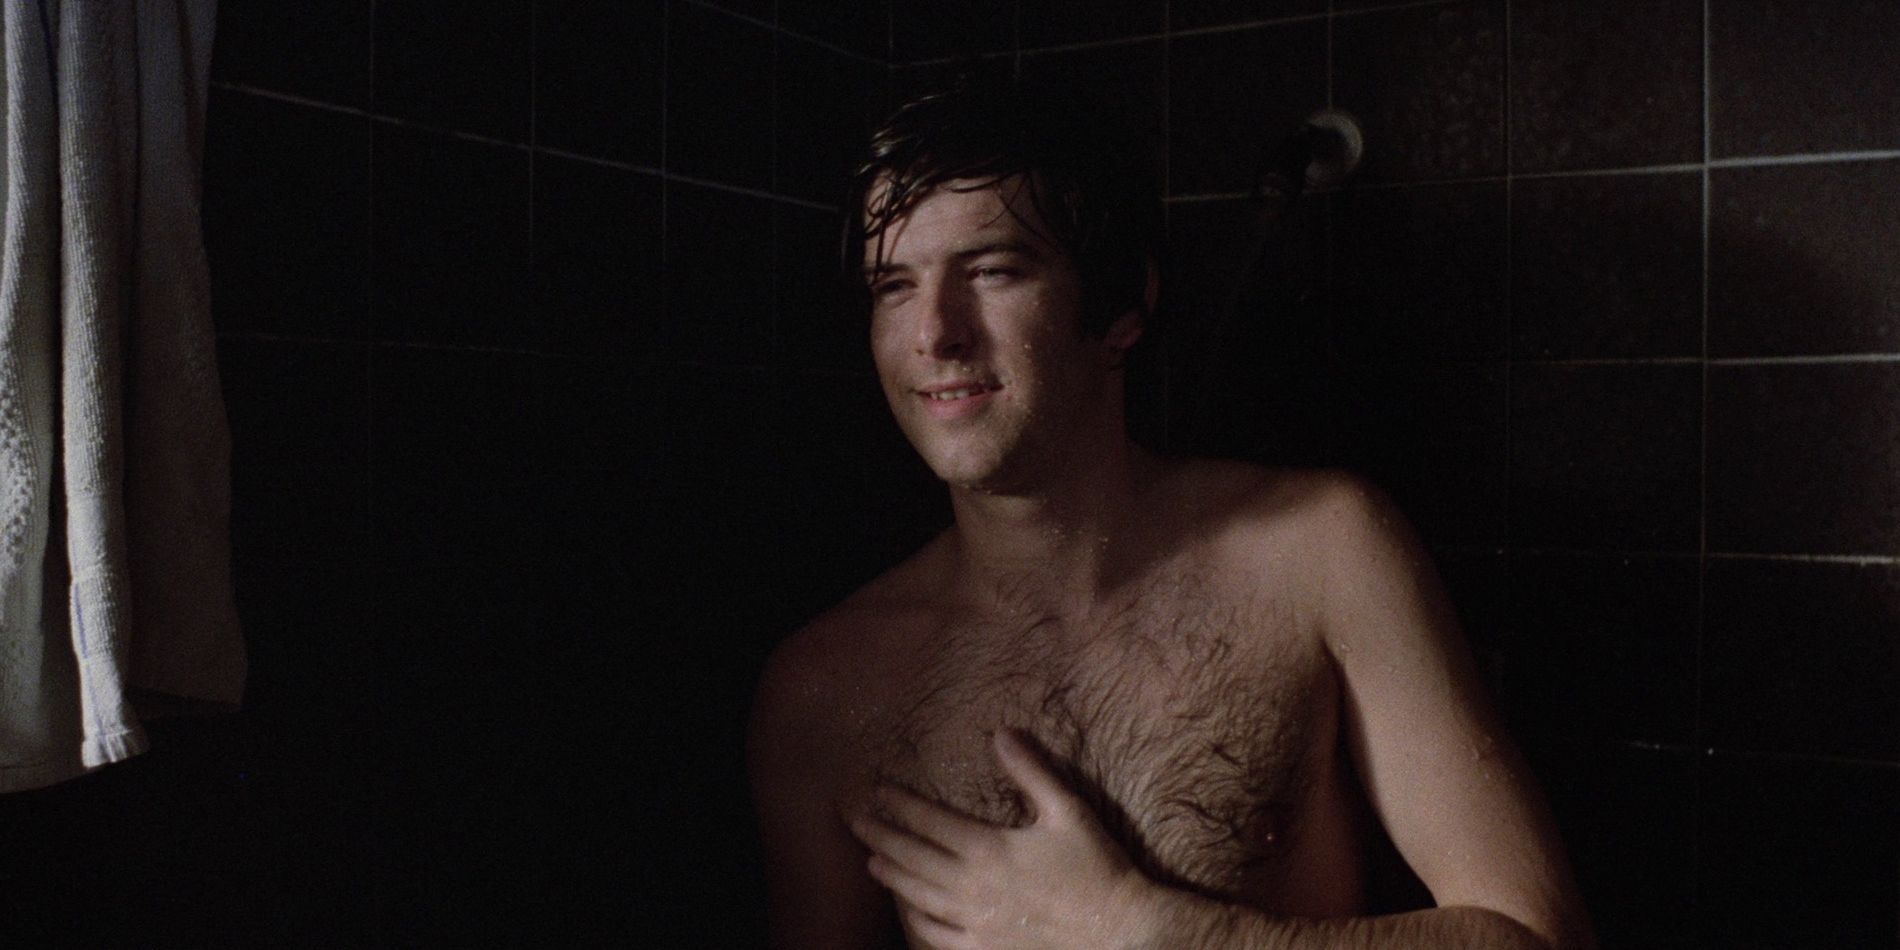 A young man taking a shower in 'The Long Good Friday'